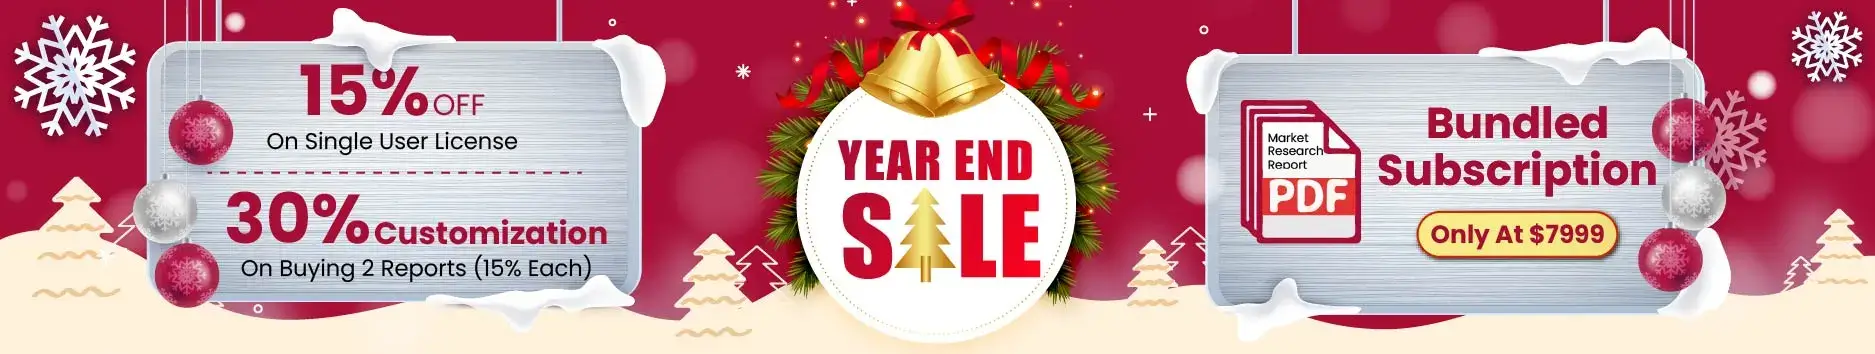 Homepage year end offer